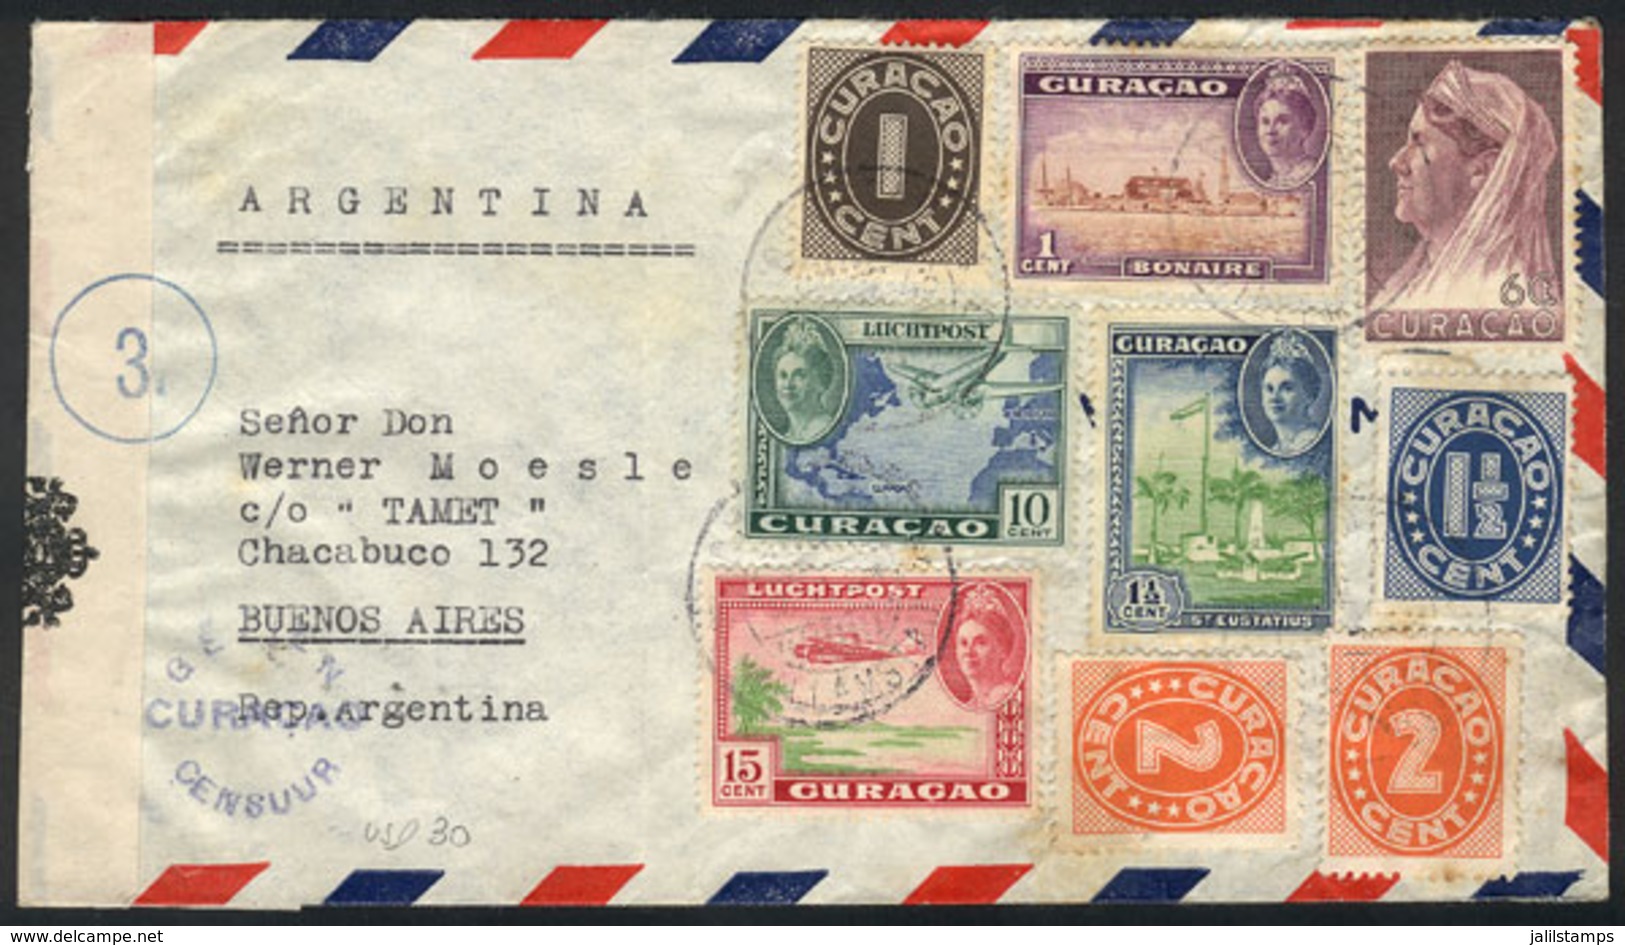 CURACAO: Airmail Cover Sent To Buenos Aires On 9/AP/1943 With Nice Multicolored Postage Of 40c. (9 Stamps) And Censored, - Curacao, Netherlands Antilles, Aruba